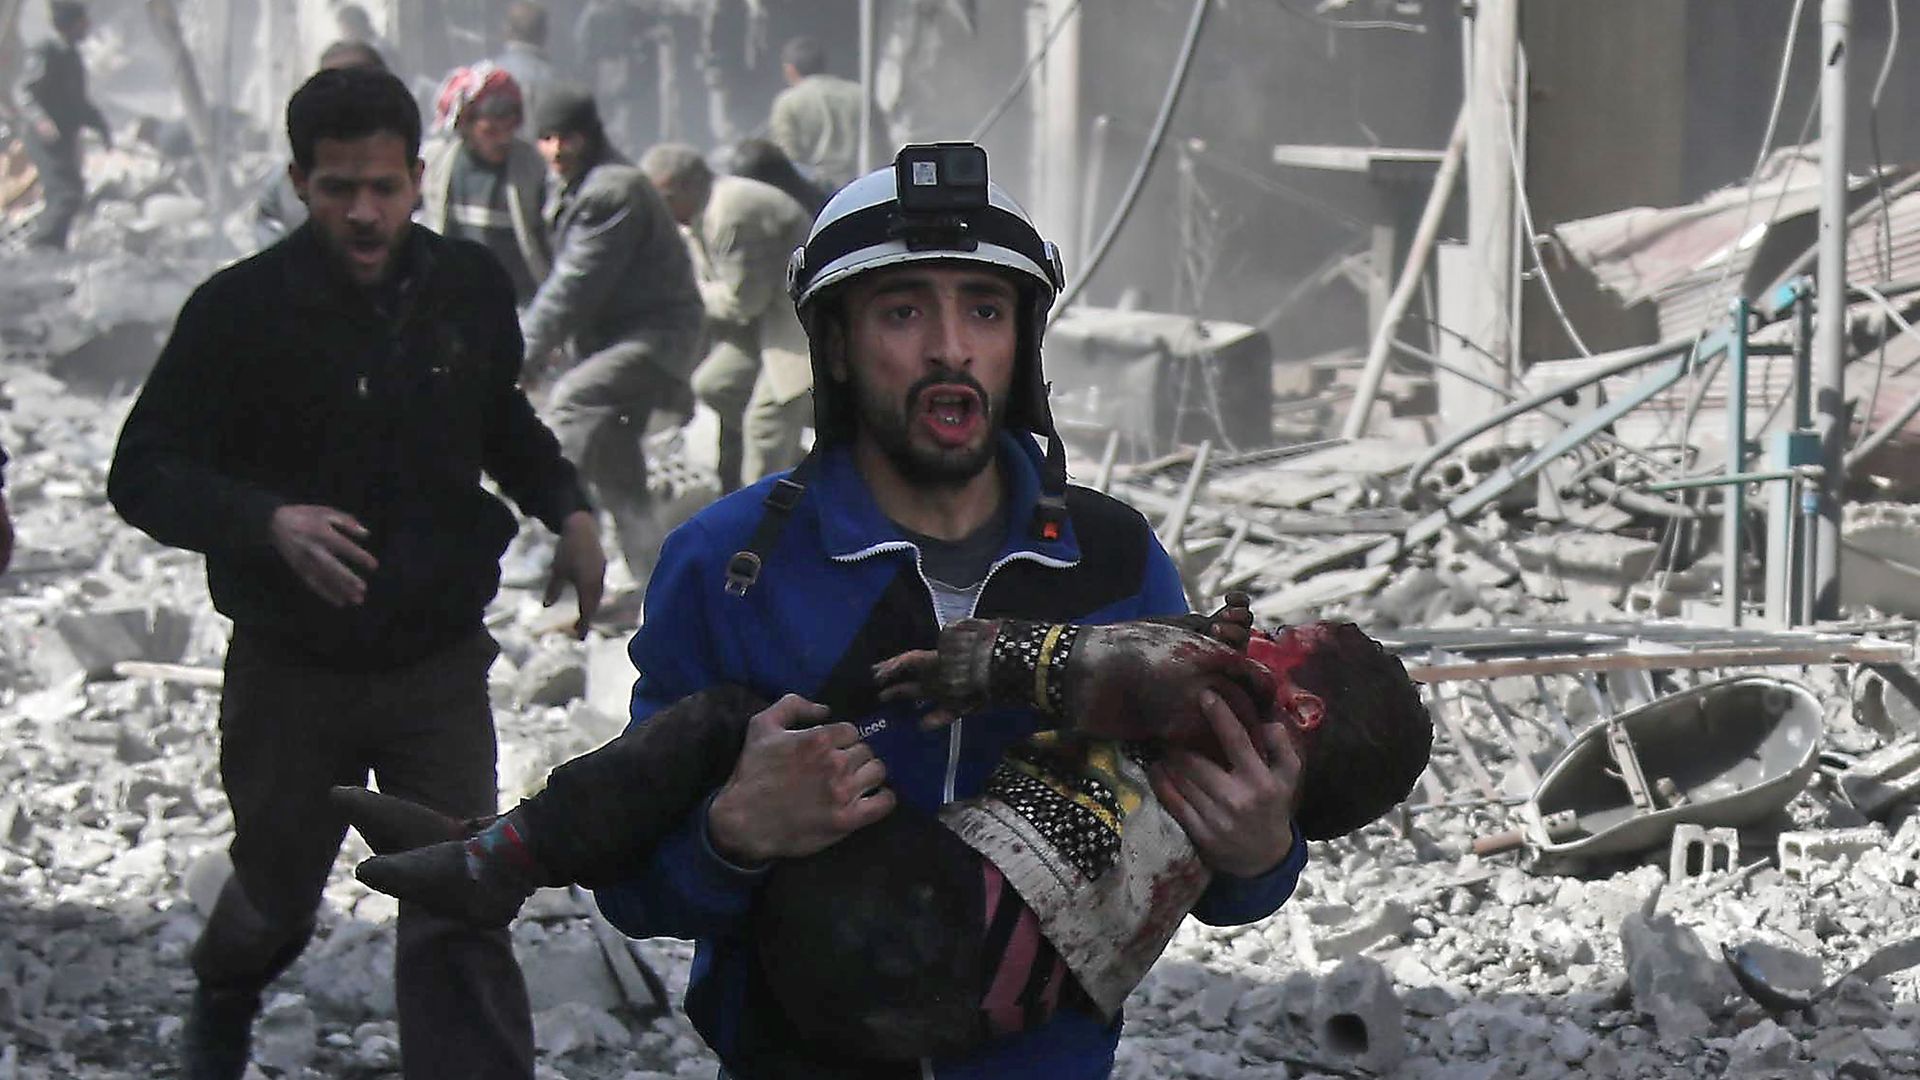  A Syrian civil defence member carries an injured child rescued following government bombing in the Eastern Ghouta region